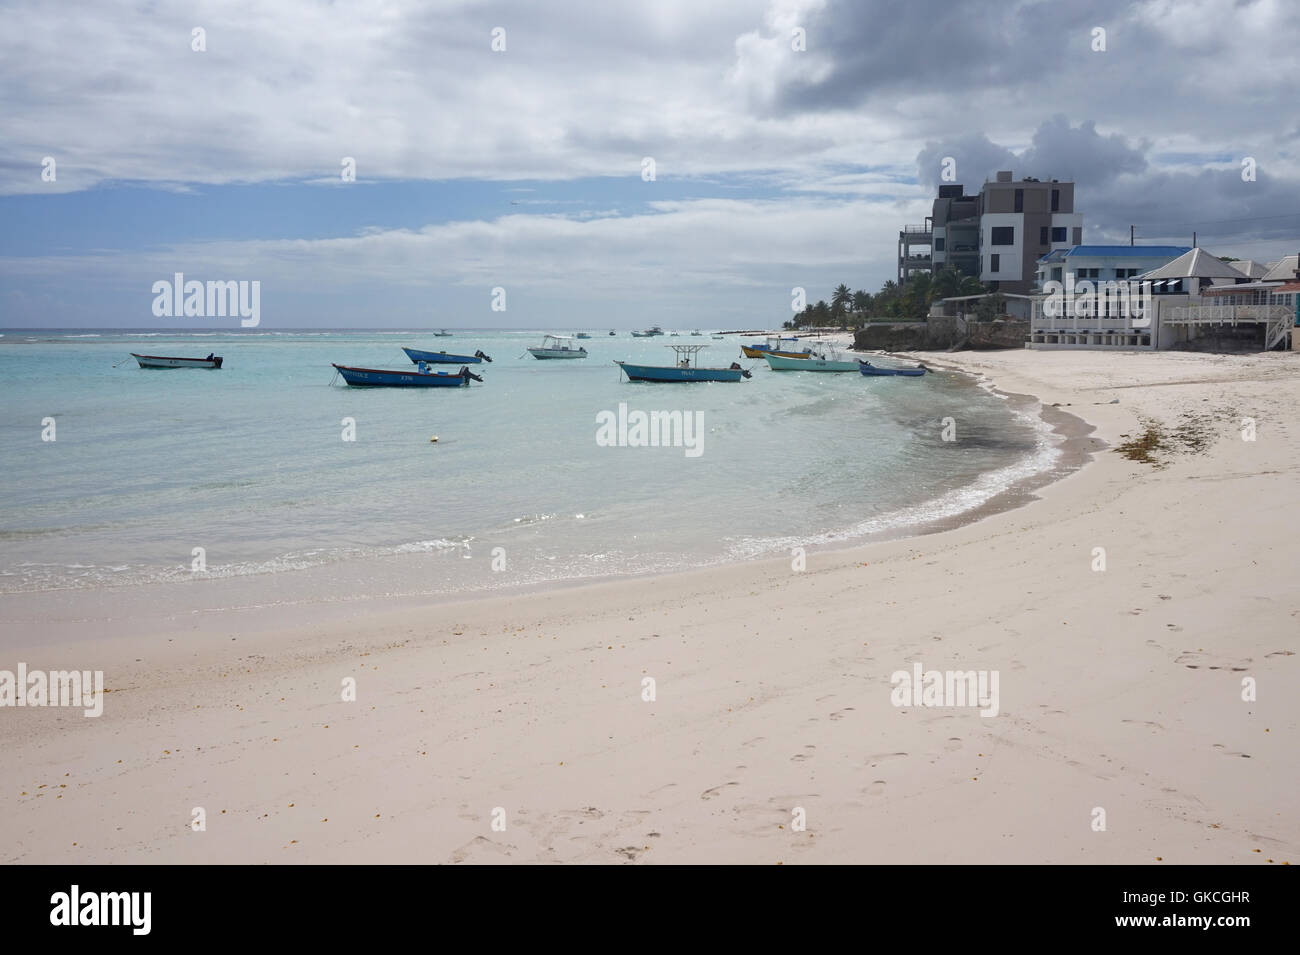 Traditional fishing boats moored at Worthing Beach, Barbados Stock Photo